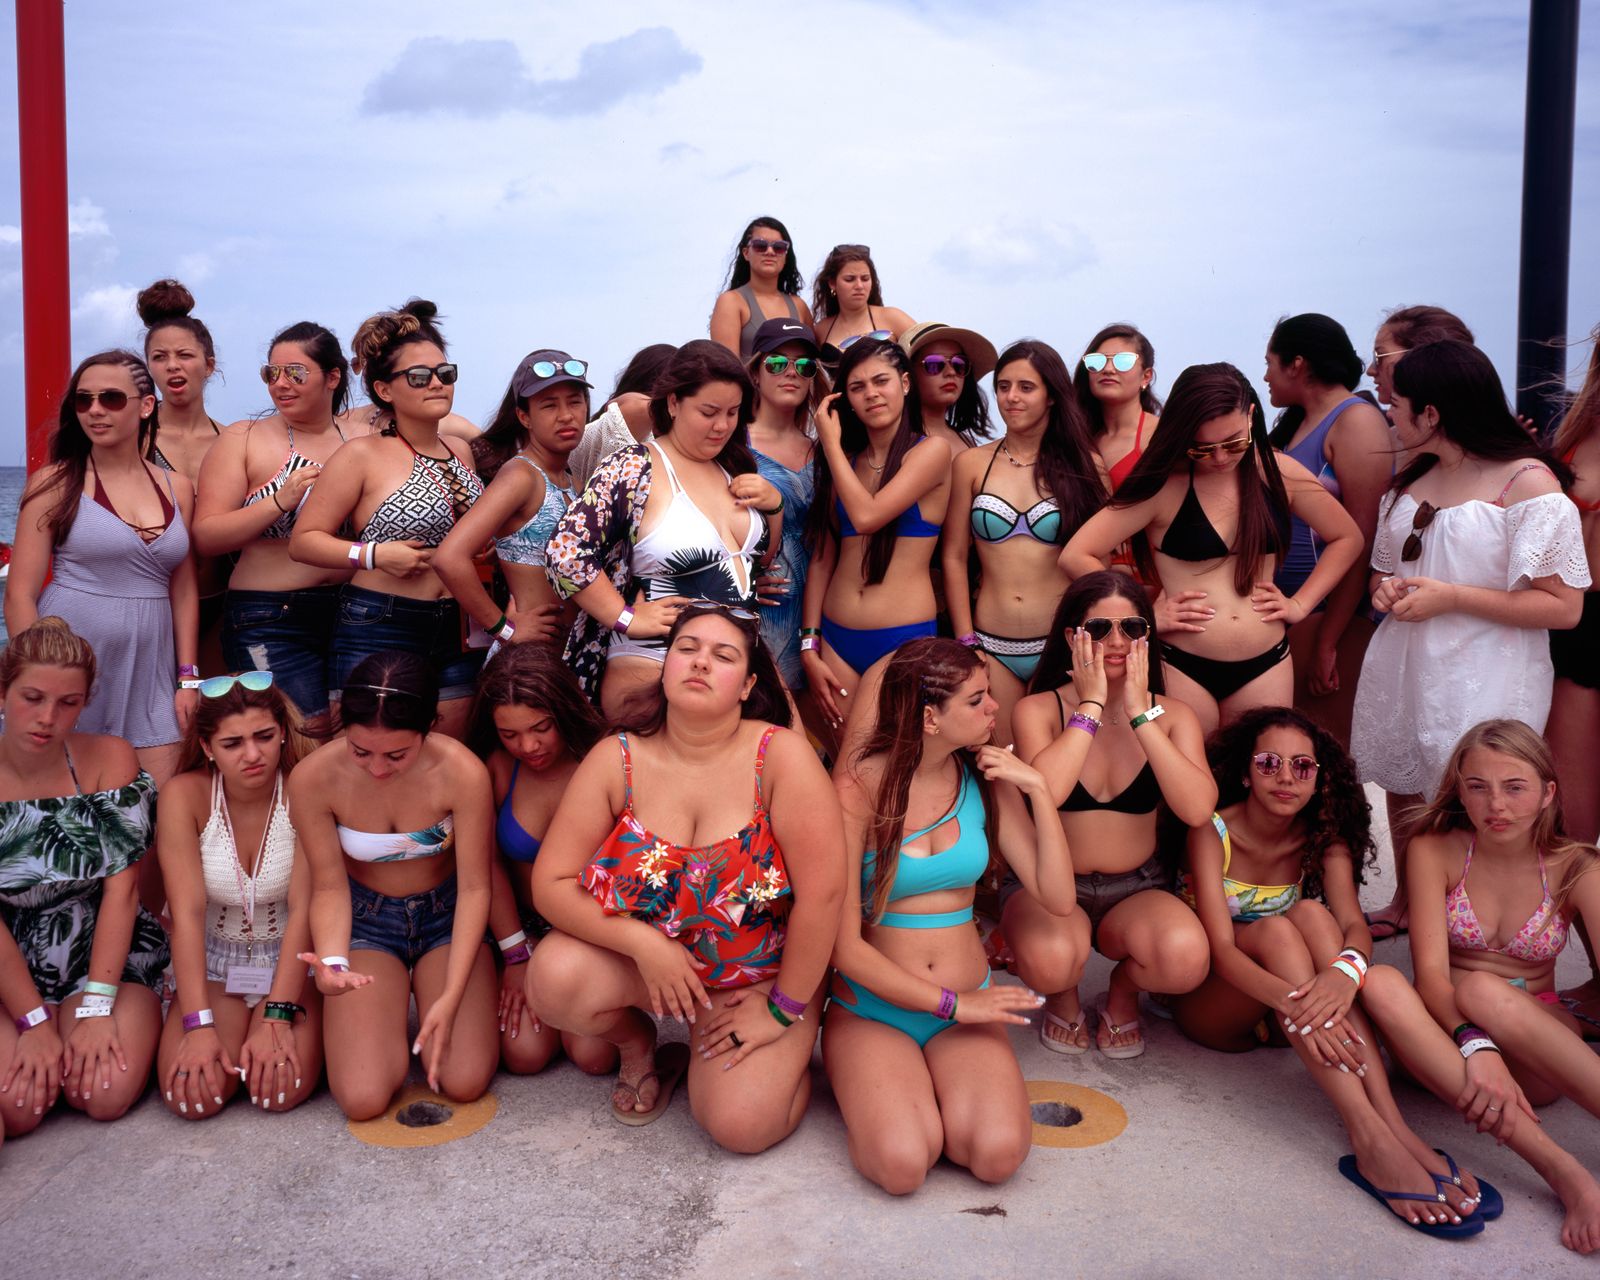 © Samantha Cabrera Friend - Quinceañera's pose for a group portrait in the cruise's final stop of Cozumel, MX